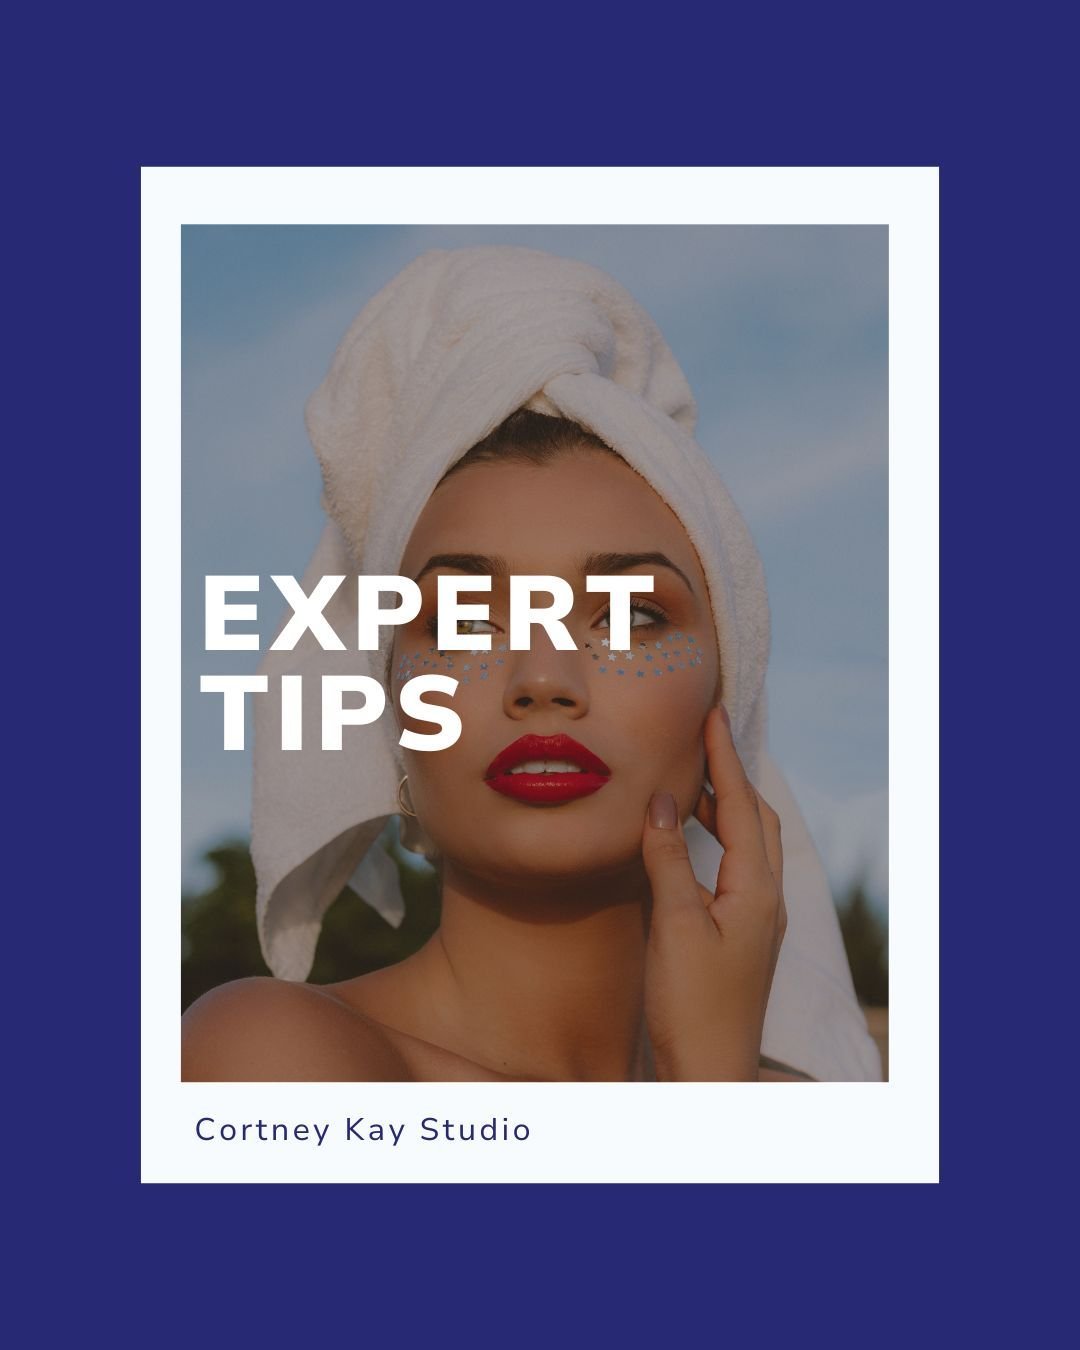 ⭐️Expert Tip⭐️
ㅤ
From #AMPclient @cortneykaystudio
ㅤ
Unlock the secret to healthier hair with Cortney's expert advice: Be gentle when drying, stop your urge to rub your hair vigorously with a towel after a hair wash. Instead, gently blot to prevent r